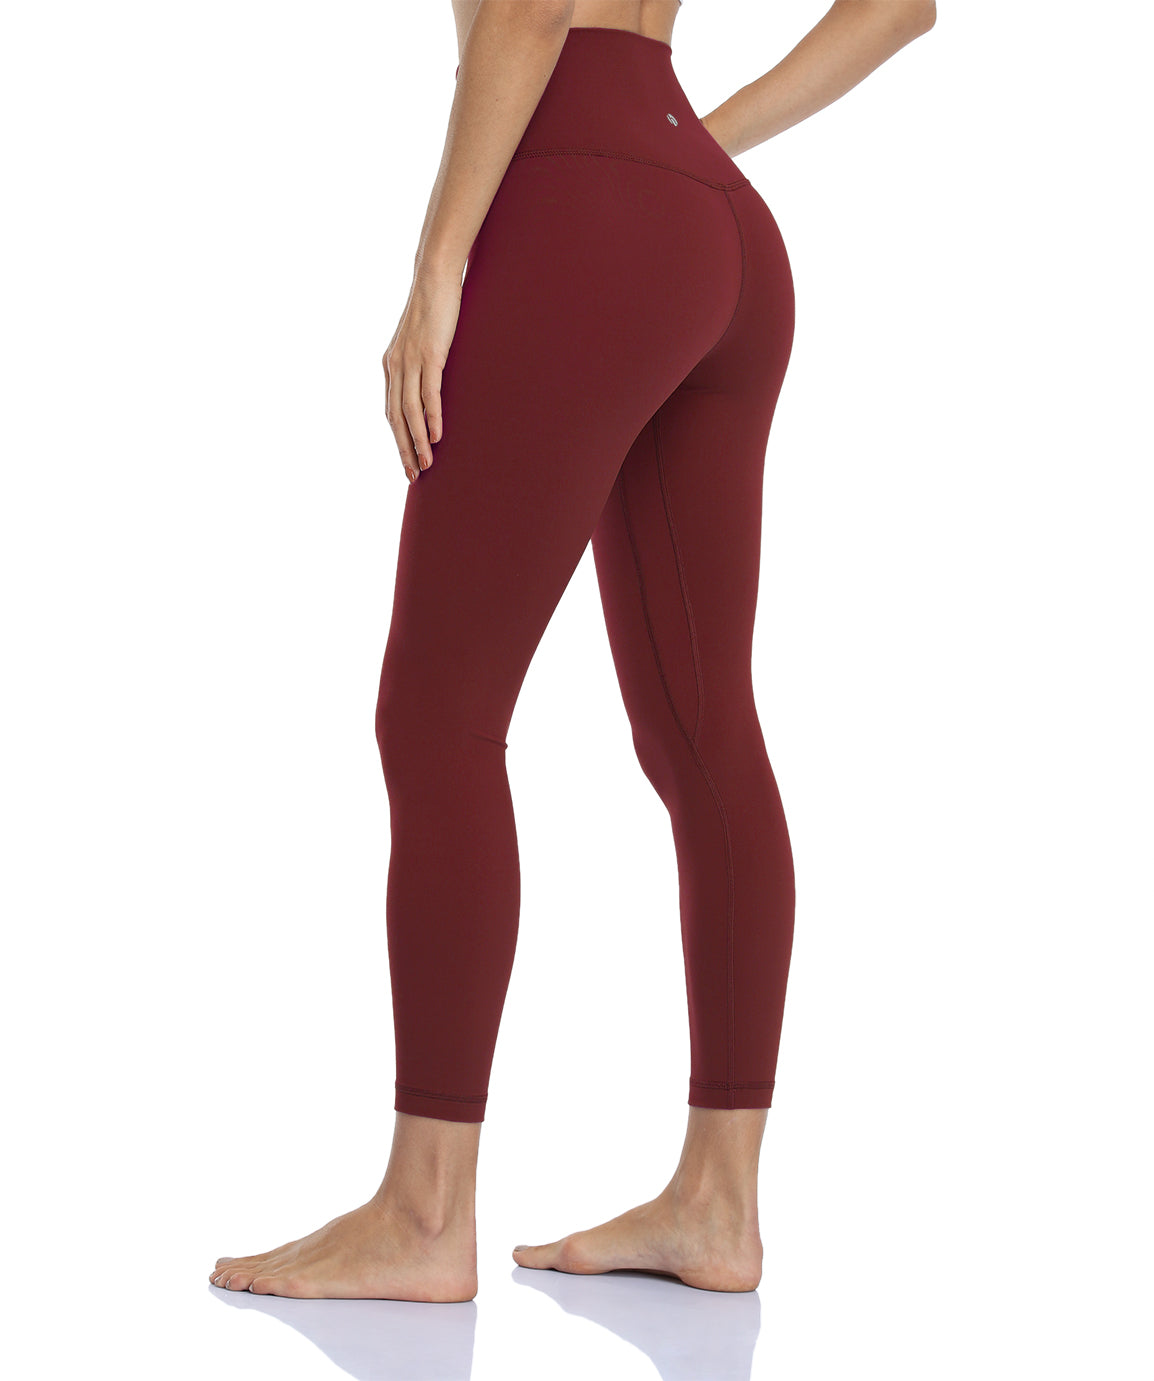 HeyNuts Essential High Waisted Yoga Capris Leggings, Tummy Control Workout  Cropped Pants 21